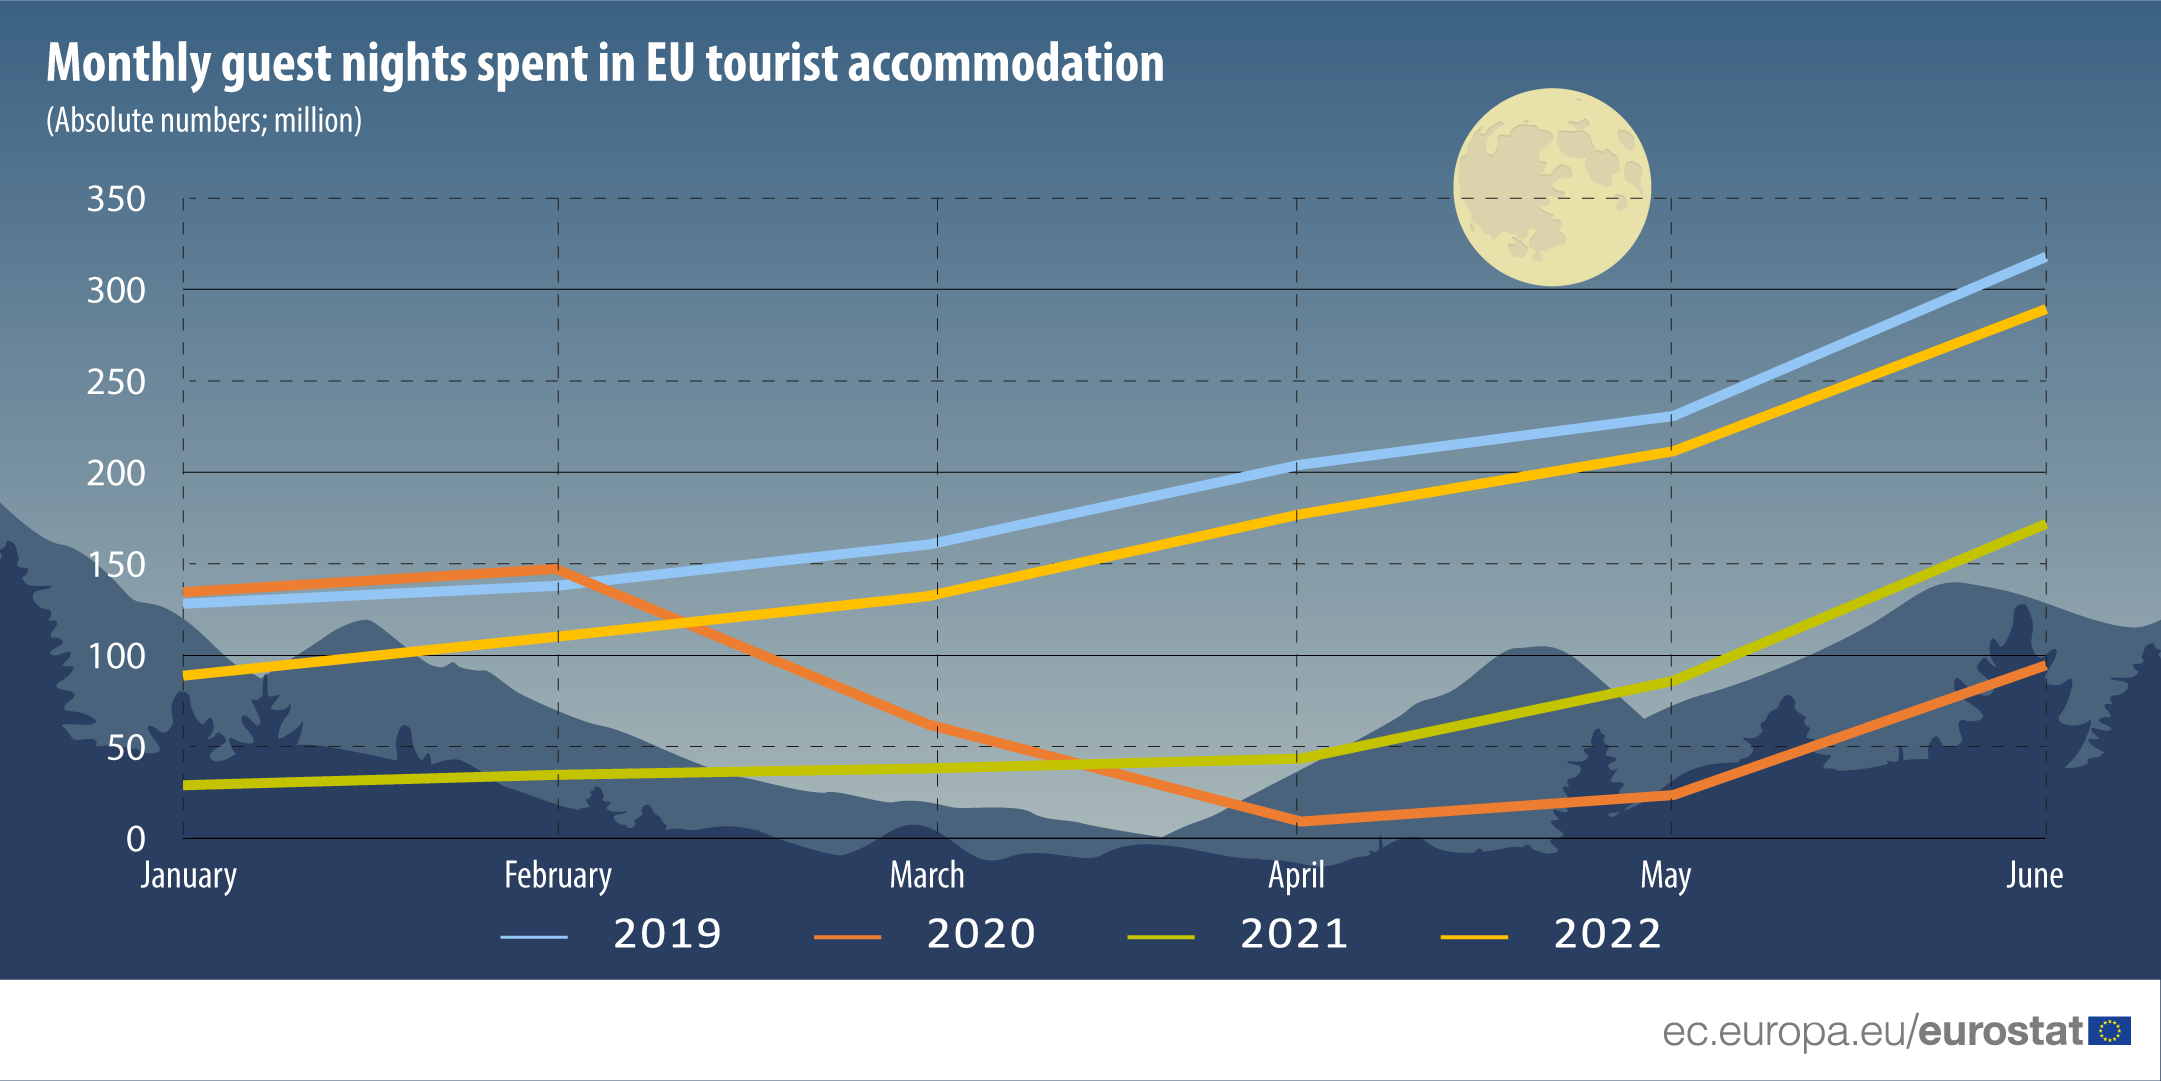 Line graph: Monthly guest nights spent in EU tourist accommodation, absolute numbers, million, January-June 2019-2022